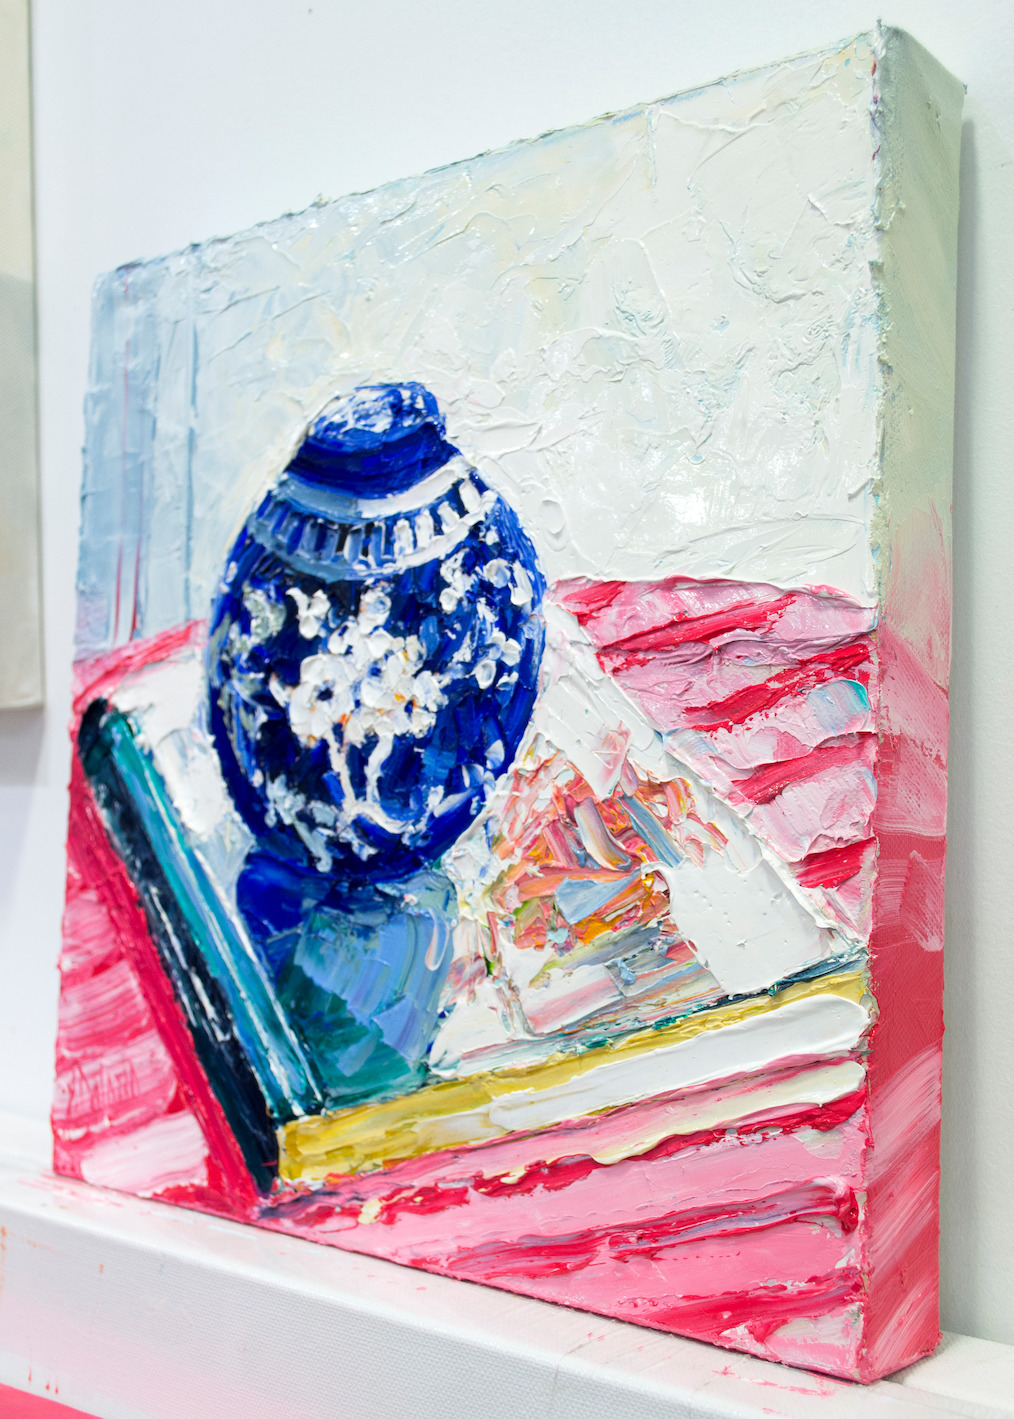 Right View Of Still Life Painting "My Favourite Ginger Jar" By Judith Dalozzo